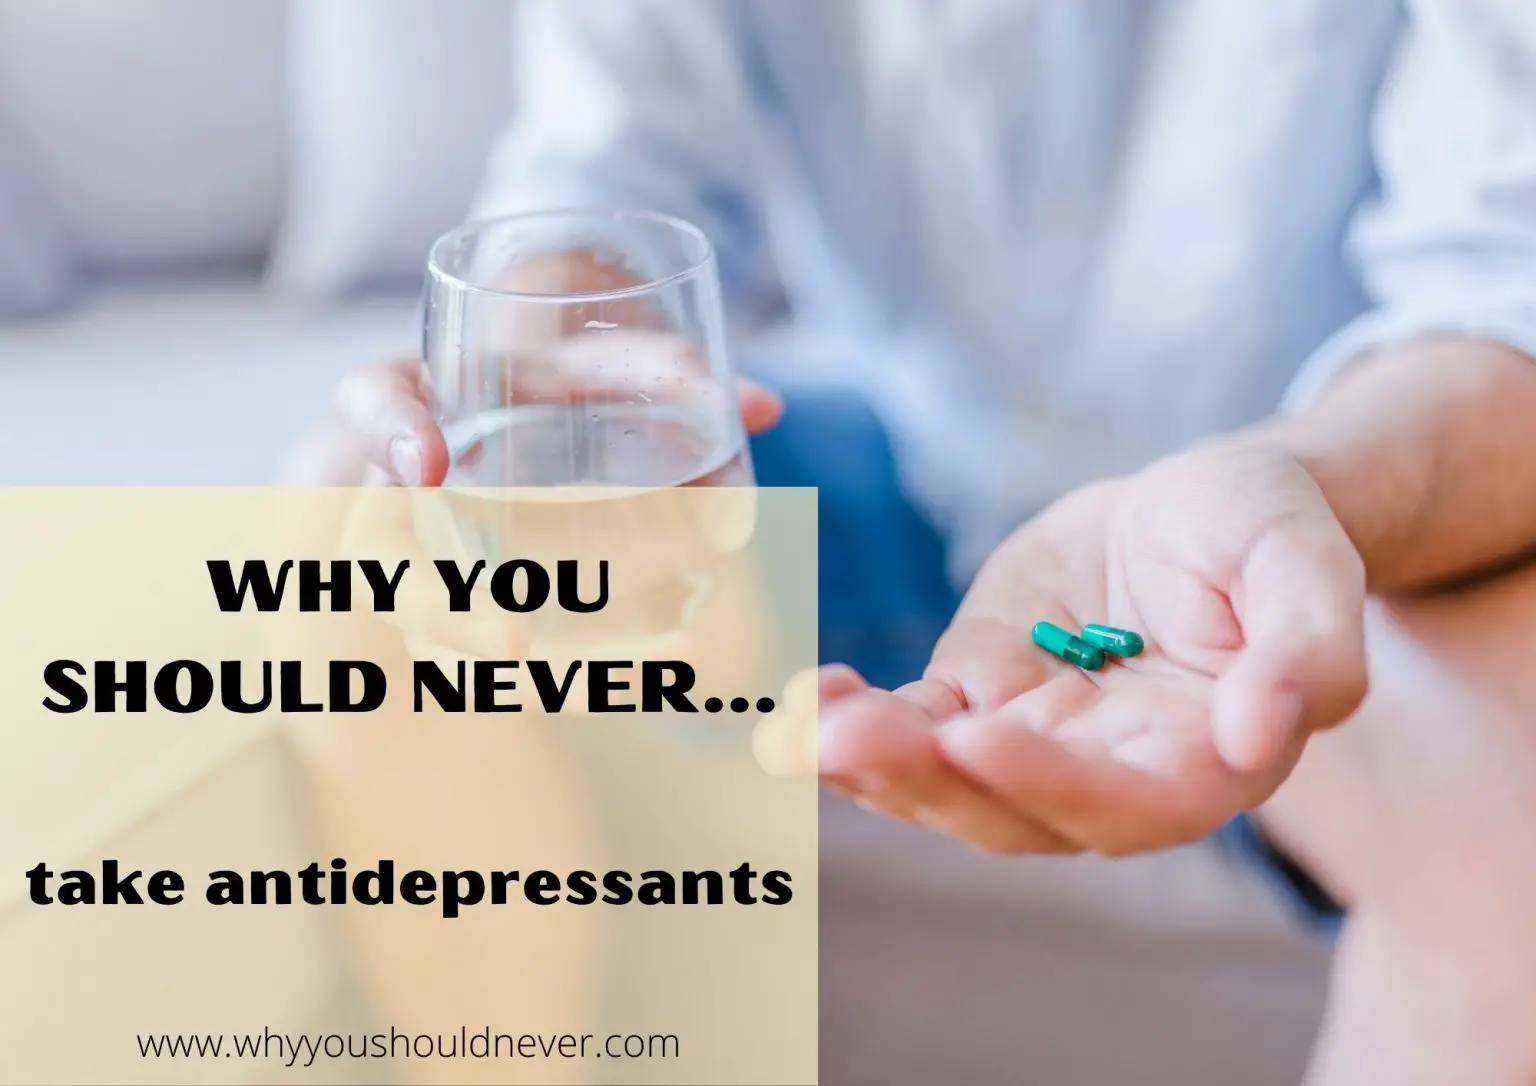 Why You Should Never Take Antidepressants Why You Should Never…